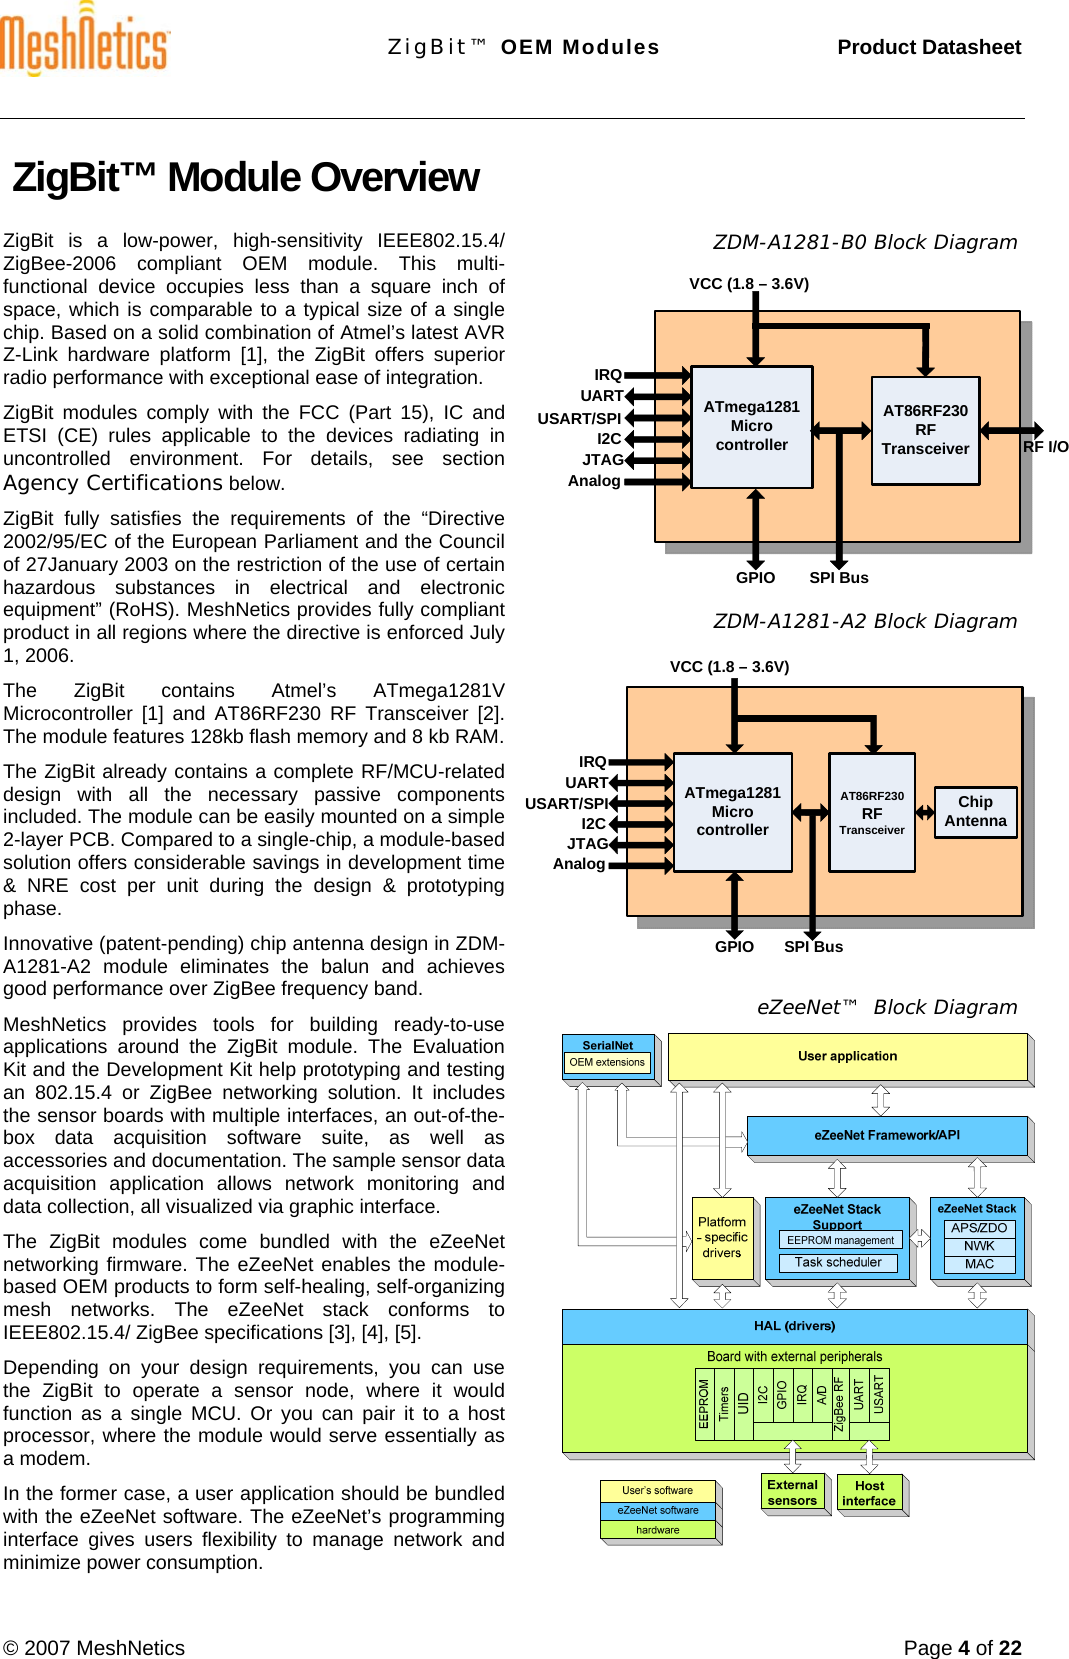 ZigBit™ OEM Modules     Product Datasheet  © 2007 MeshNetics  Page 4 of 22  AT86RF230RFTransceiverATmega1281Microcontroller RF I/OSPI BusGPIOVCC (1.8 – 3.6V)UARTI2CJTAGAnalogIRQUSART/SPIATmega1281MicrocontrollerSPI BusGPIOVCC (1.8 – 3.6V)UARTI2CJTAGAnalogIRQAT86RF230RFTransceiverChip AntennaUSART/SPI ZigBit™ Module Overview  ZigBit is a low-power, high-sensitivity IEEE802.15.4/ ZigBee-2006 compliant OEM module. This multi-functional device occupies less than a square inch of space, which is comparable to a typical size of a single chip. Based on a solid combination of Atmel’s latest AVR Z-Link hardware platform [1], the ZigBit offers superior radio performance with exceptional ease of integration. ZigBit modules comply with the FCC (Part 15), IC and ETSI (CE) rules applicable to the devices radiating in  uncontrolled environment. For details, see section Agency Certifications below. ZigBit fully satisfies the requirements of the “Directive 2002/95/EC of the European Parliament and the Council of 27January 2003 on the restriction of the use of certain hazardous substances in electrical and electronic equipment” (RoHS). MeshNetics provides fully compliant product in all regions where the directive is enforced July 1, 2006. The ZigBit contains Atmel’s ATmega1281V Microcontroller  [1] and AT86RF230 RF Transceiver [2]. The module features 128kb flash memory and 8 kb RAM.  The ZigBit already contains a complete RF/MCU-related design with all the necessary passive components included. The module can be easily mounted on a simple 2-layer PCB. Compared to a single-chip, a module-based solution offers considerable savings in development time &amp; NRE cost per unit during the design &amp; prototyping phase. Innovative (patent-pending) chip antenna design in ZDM-A1281-A2 module eliminates the balun and achieves good performance over ZigBee frequency band.  MeshNetics provides tools for building ready-to-use applications around the ZigBit module. The Evaluation Kit and the Development Kit help prototyping and testing an 802.15.4 or ZigBee networking solution. It includes the sensor boards with multiple interfaces, an out-of-the-box data acquisition software suite, as well as accessories and documentation. The sample sensor data acquisition application allows network monitoring and data collection, all visualized via graphic interface. The ZigBit modules come bundled with the eZeeNet networking firmware. The eZeeNet enables the module-based OEM products to form self-healing, self-organizing mesh networks. The eZeeNet stack conforms to IEEE802.15.4/ ZigBee specifications [3], [4], [5]. Depending on your design requirements, you can use the ZigBit to operate a sensor node, where it would function as a single MCU. Or you can pair it to a host processor, where the module would serve essentially as a modem.  In the former case, a user application should be bundled with the eZeeNet software. The eZeeNet’s programming interface gives users flexibility to manage network and minimize power consumption.  ZDM-A1281-B0 Block Diagram           ZDM-A1281-A2 Block Diagram              eZeeNet™  Block Diagram   